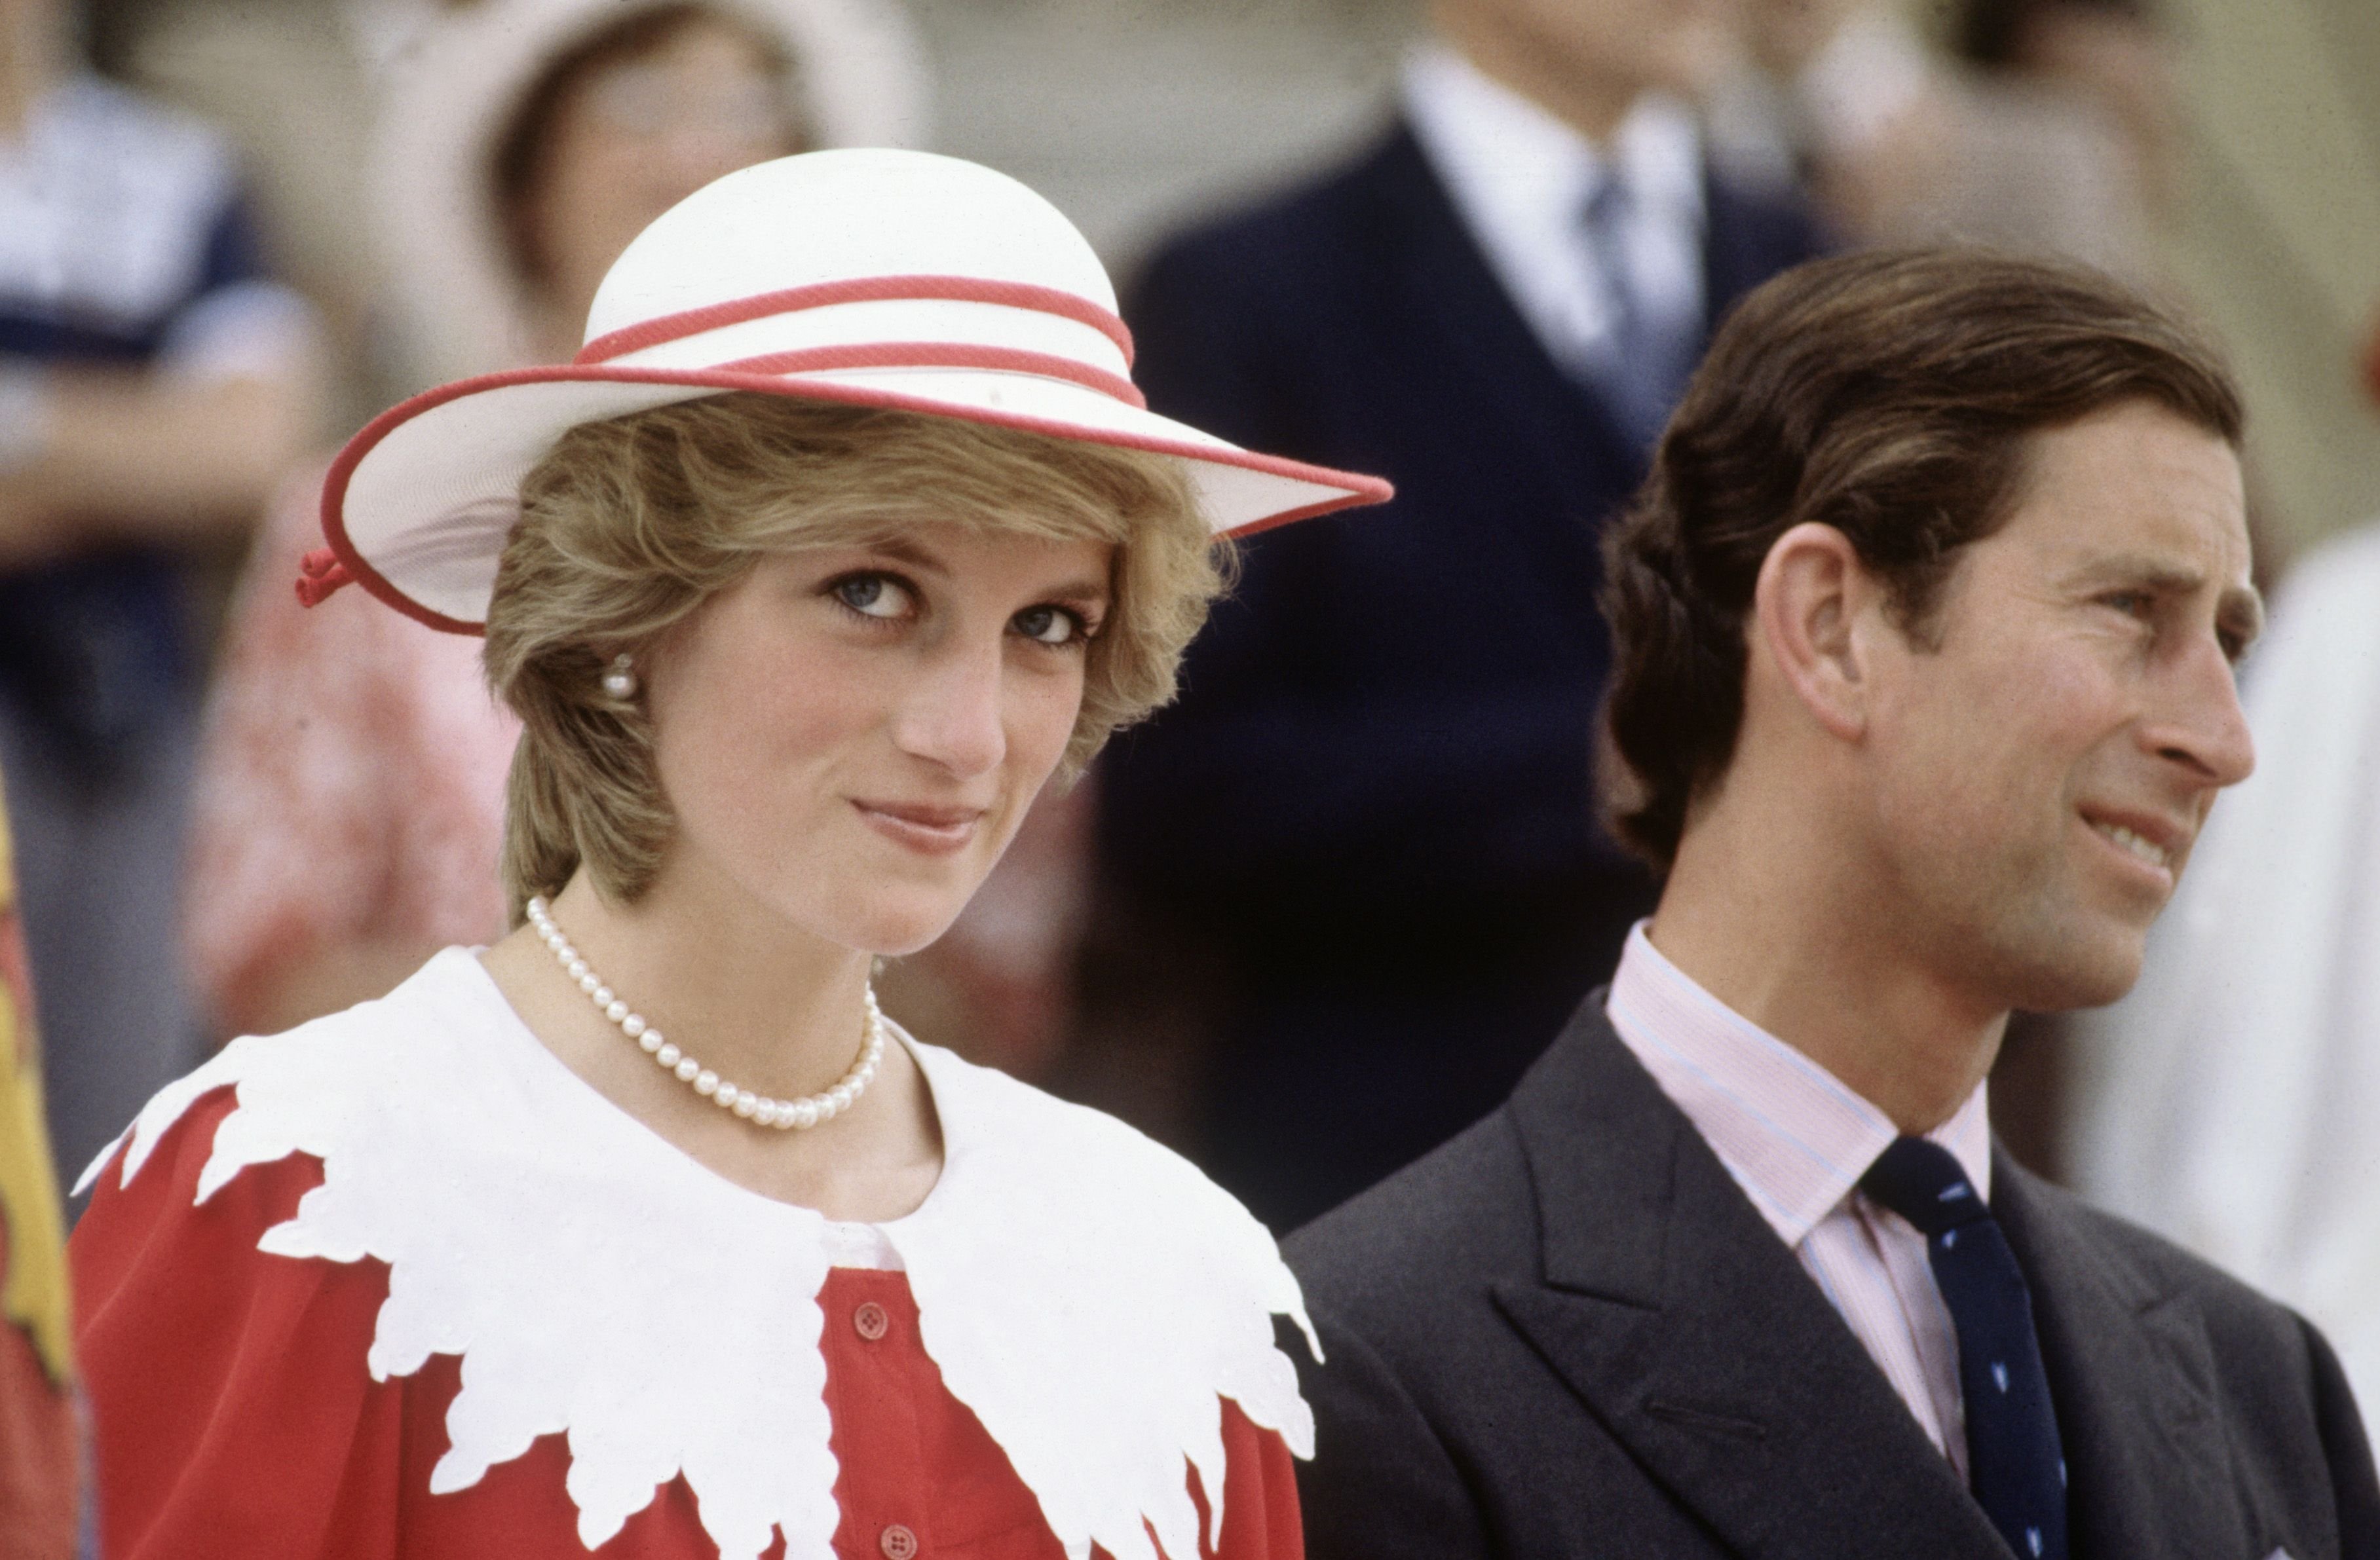 Princess Diana and Prince Charles during the Royal Tour of Canada on June 29, 1983 | Source: Getty Images